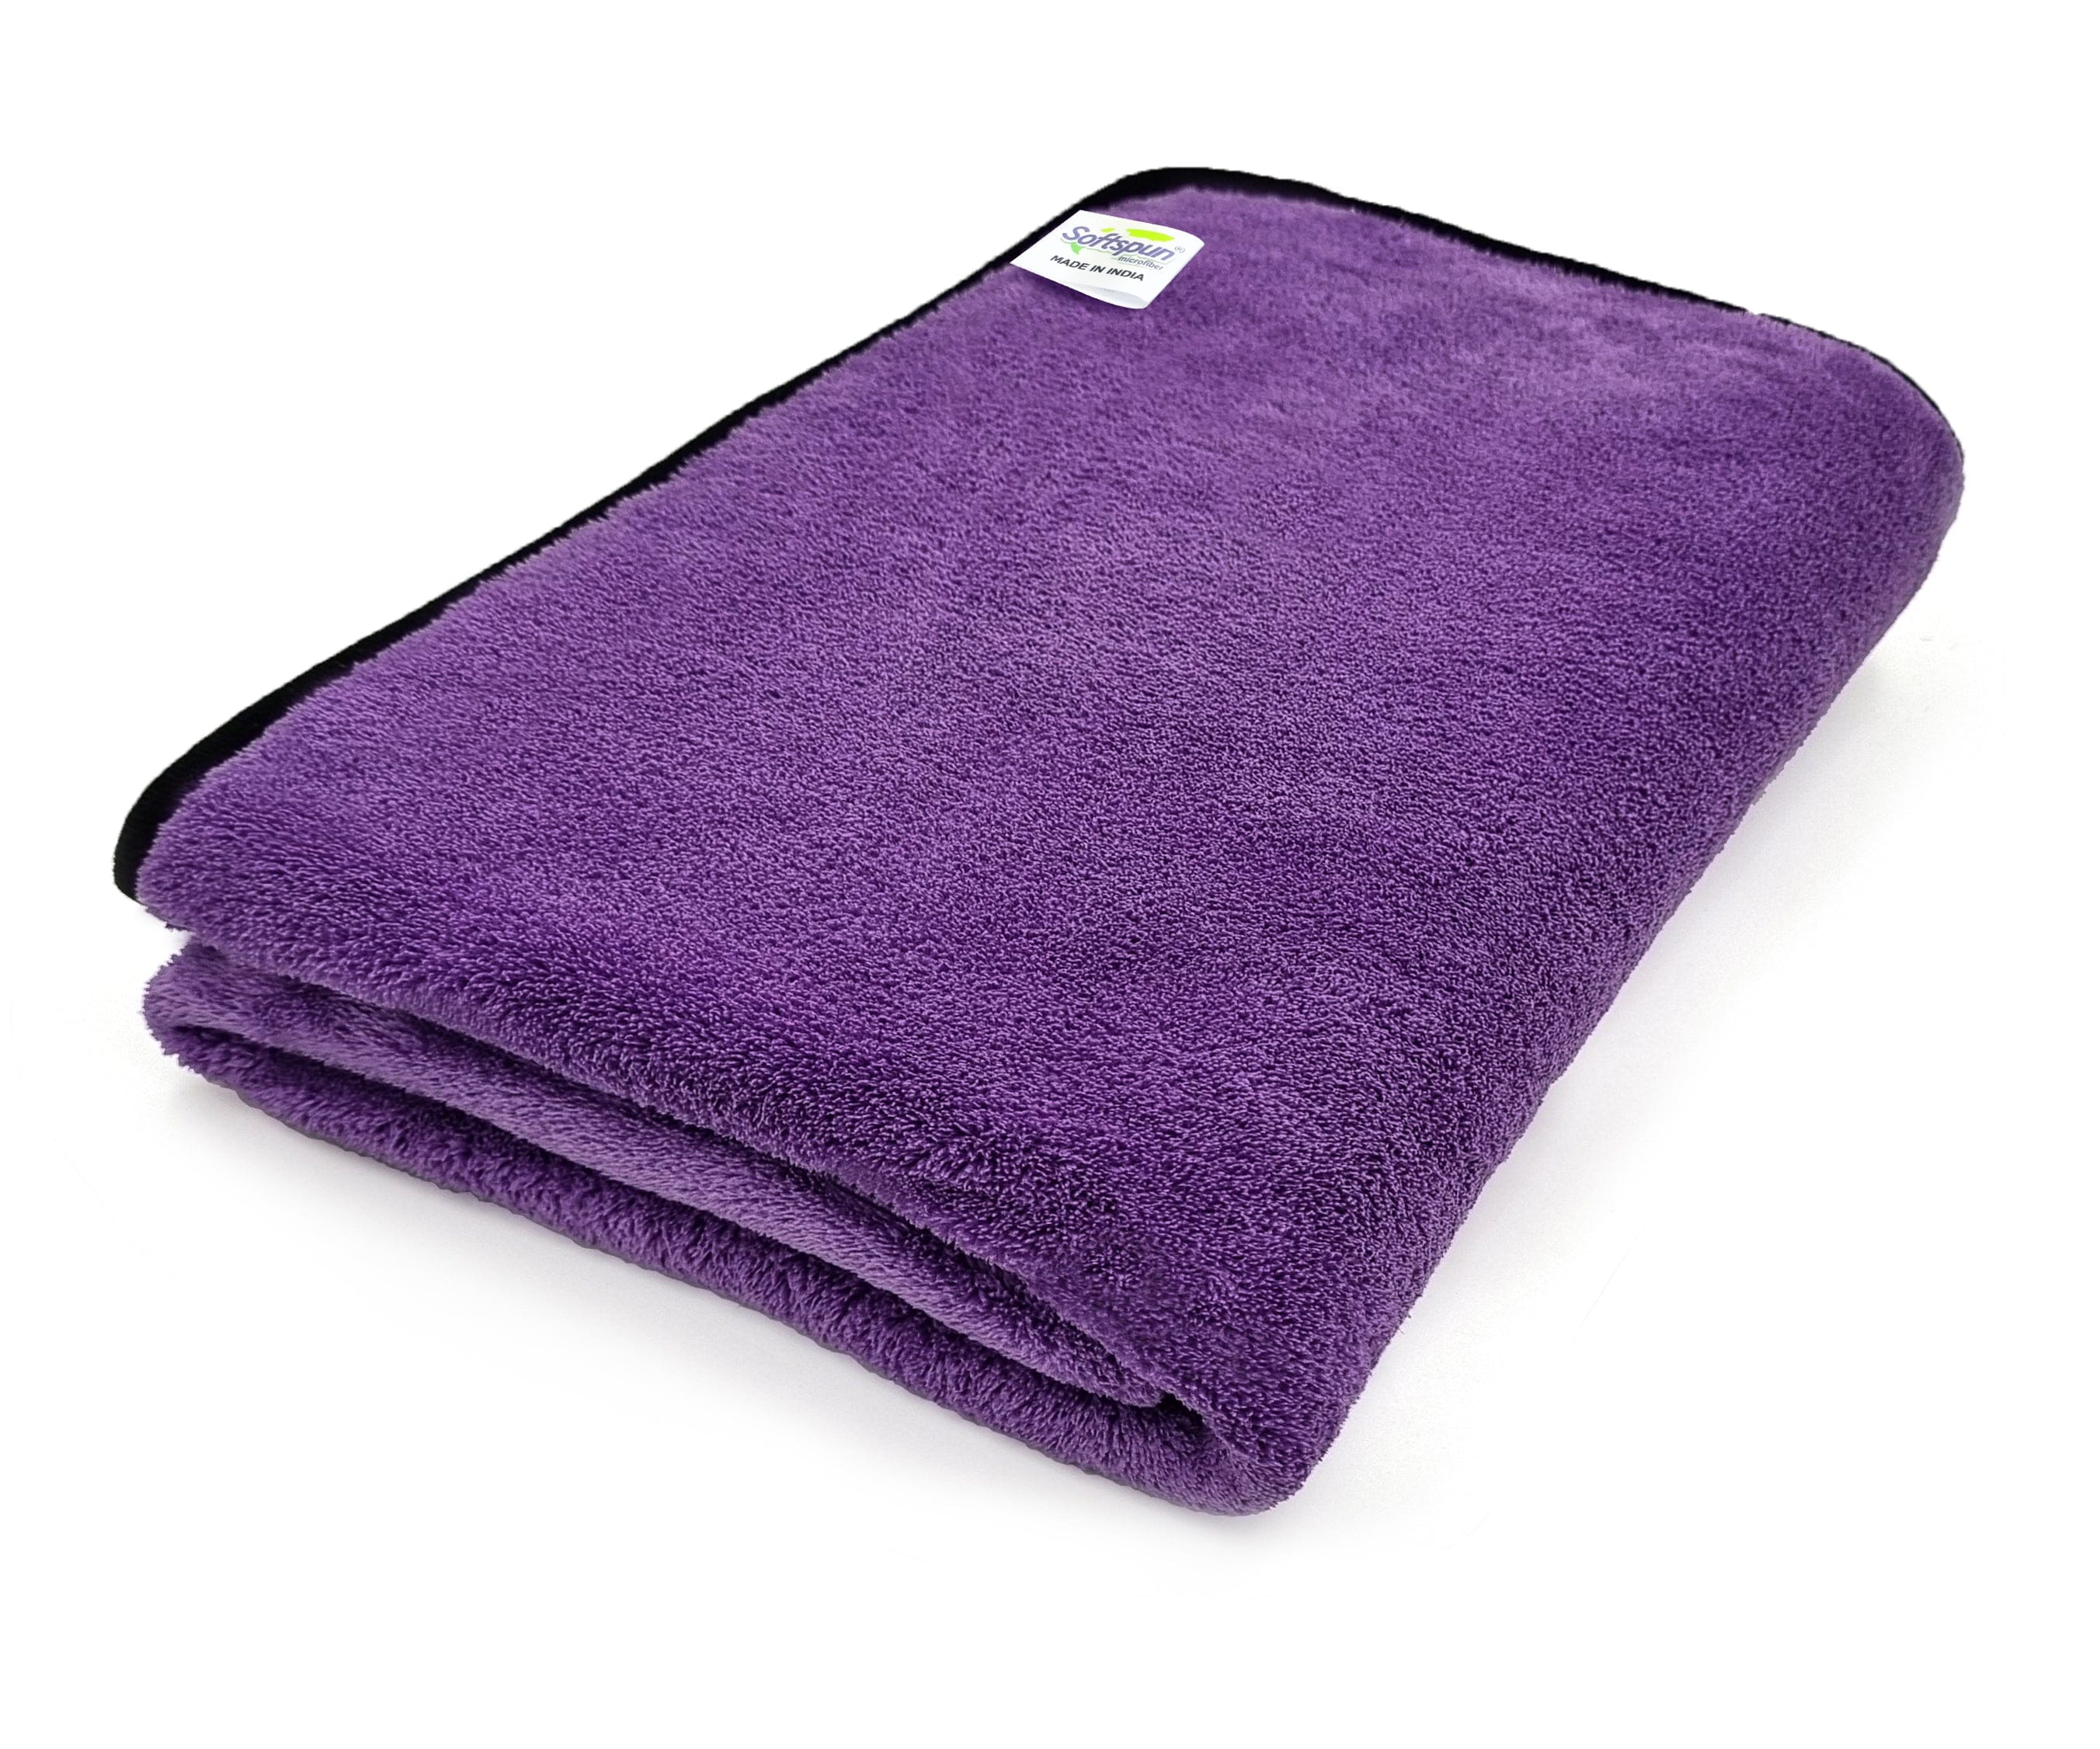 SOFTSPUN Microfiber Bath Towel 1 pc 60x120cm280 GSM Ultra Absorbent Super Soft & Comfortable Quick Drying for Men & Women Daily Use Pack of 1 Extra Large Size Unisex.